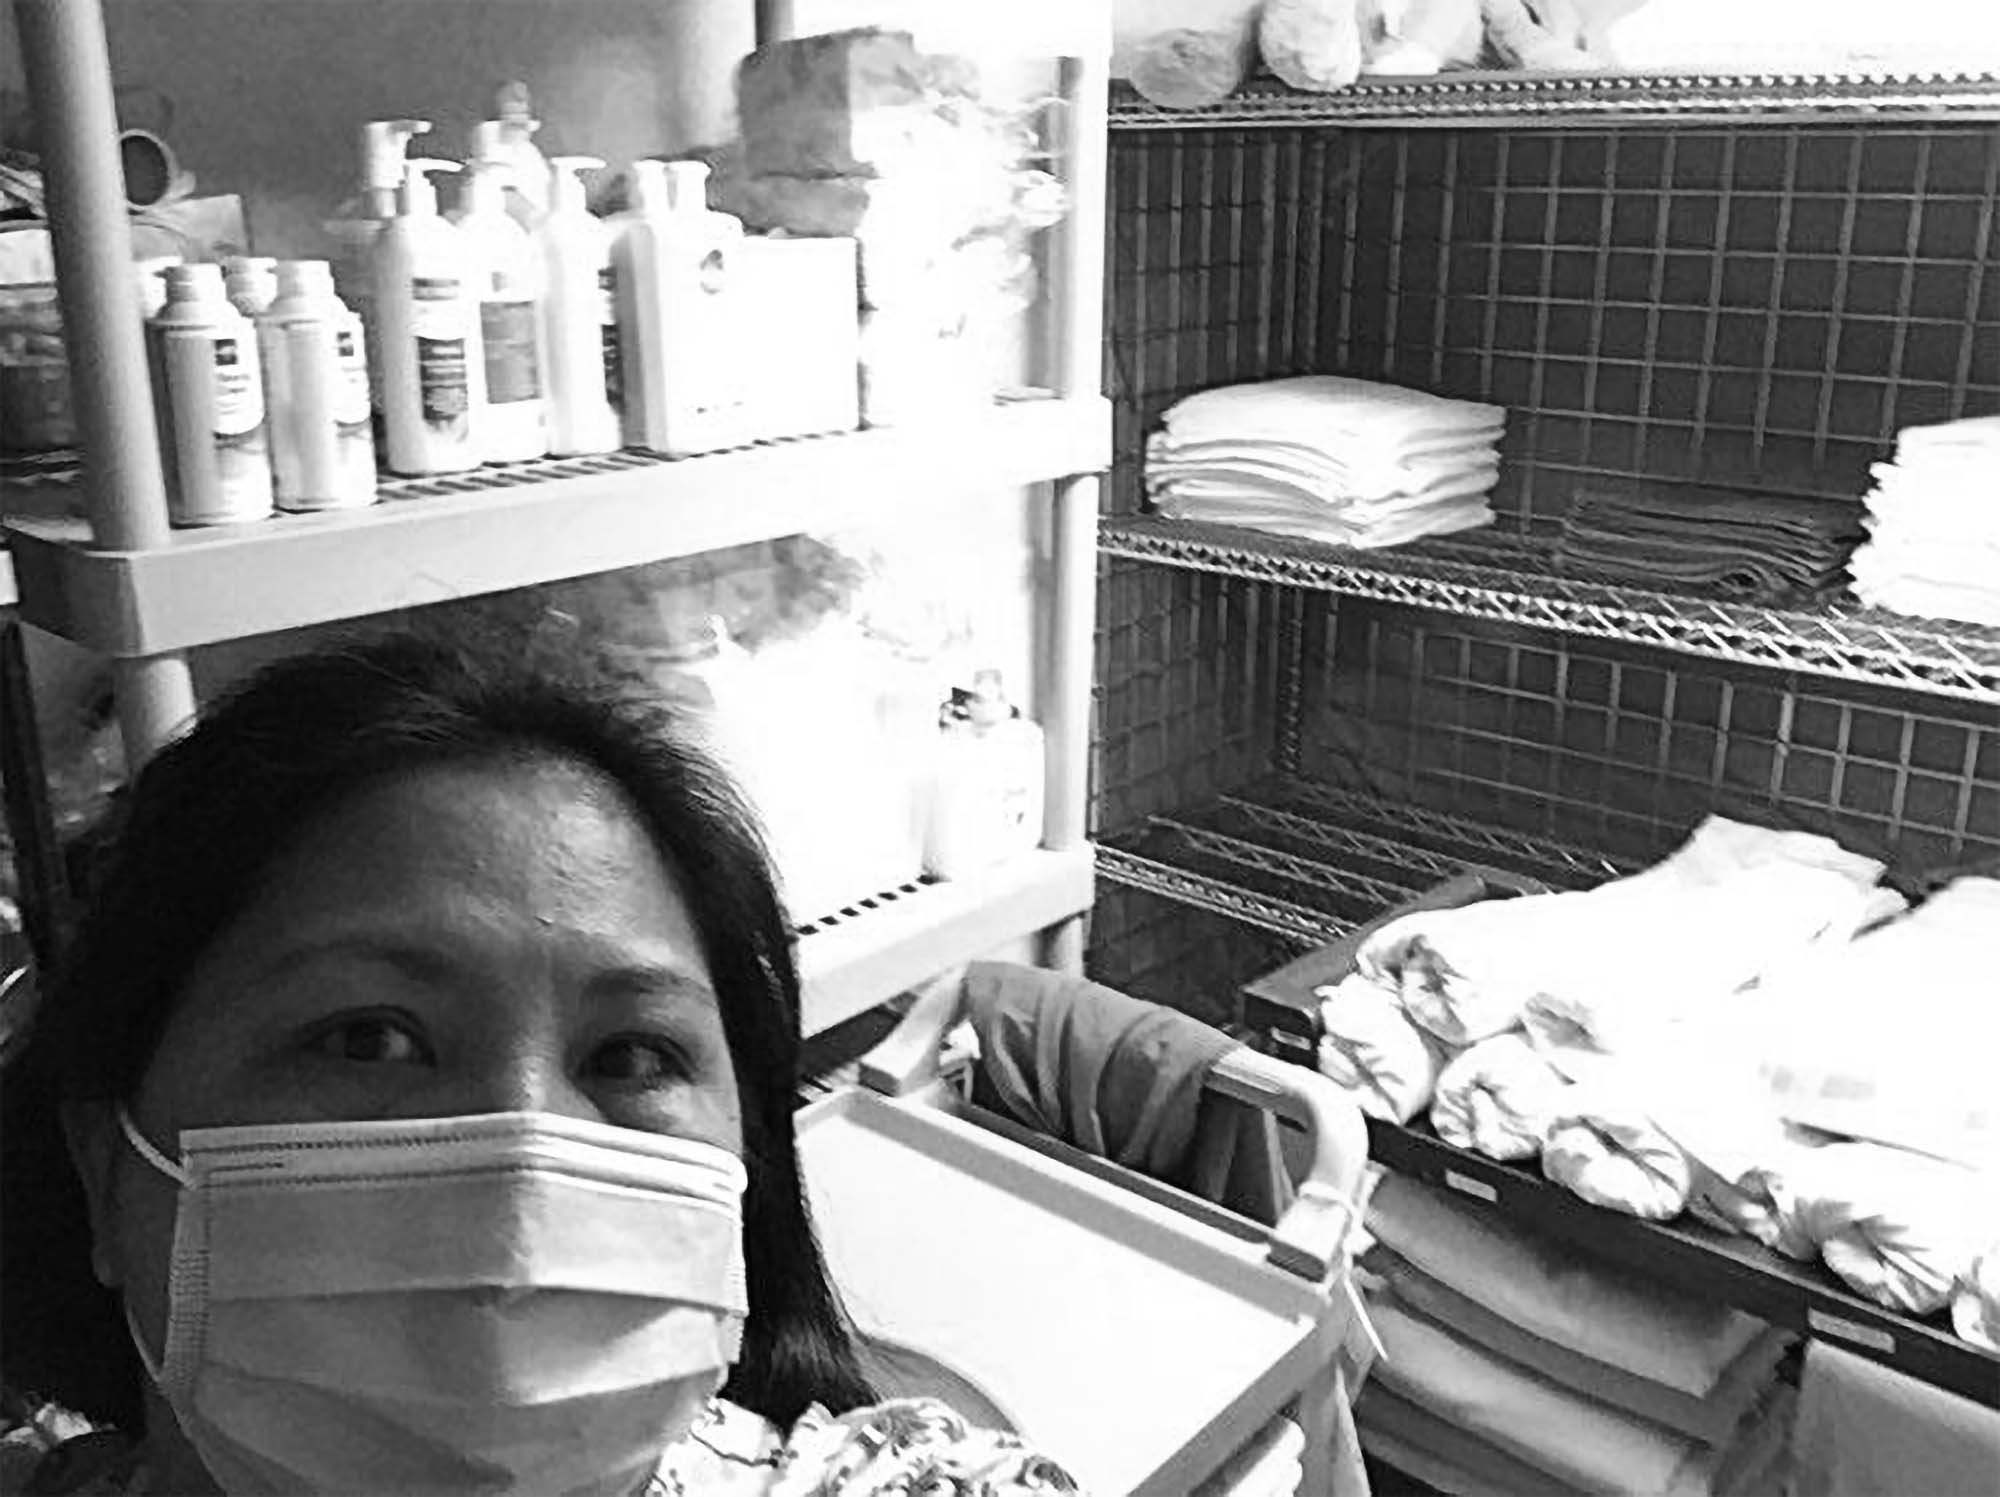 Woman in a supply closet staring at the camera wearing a mask